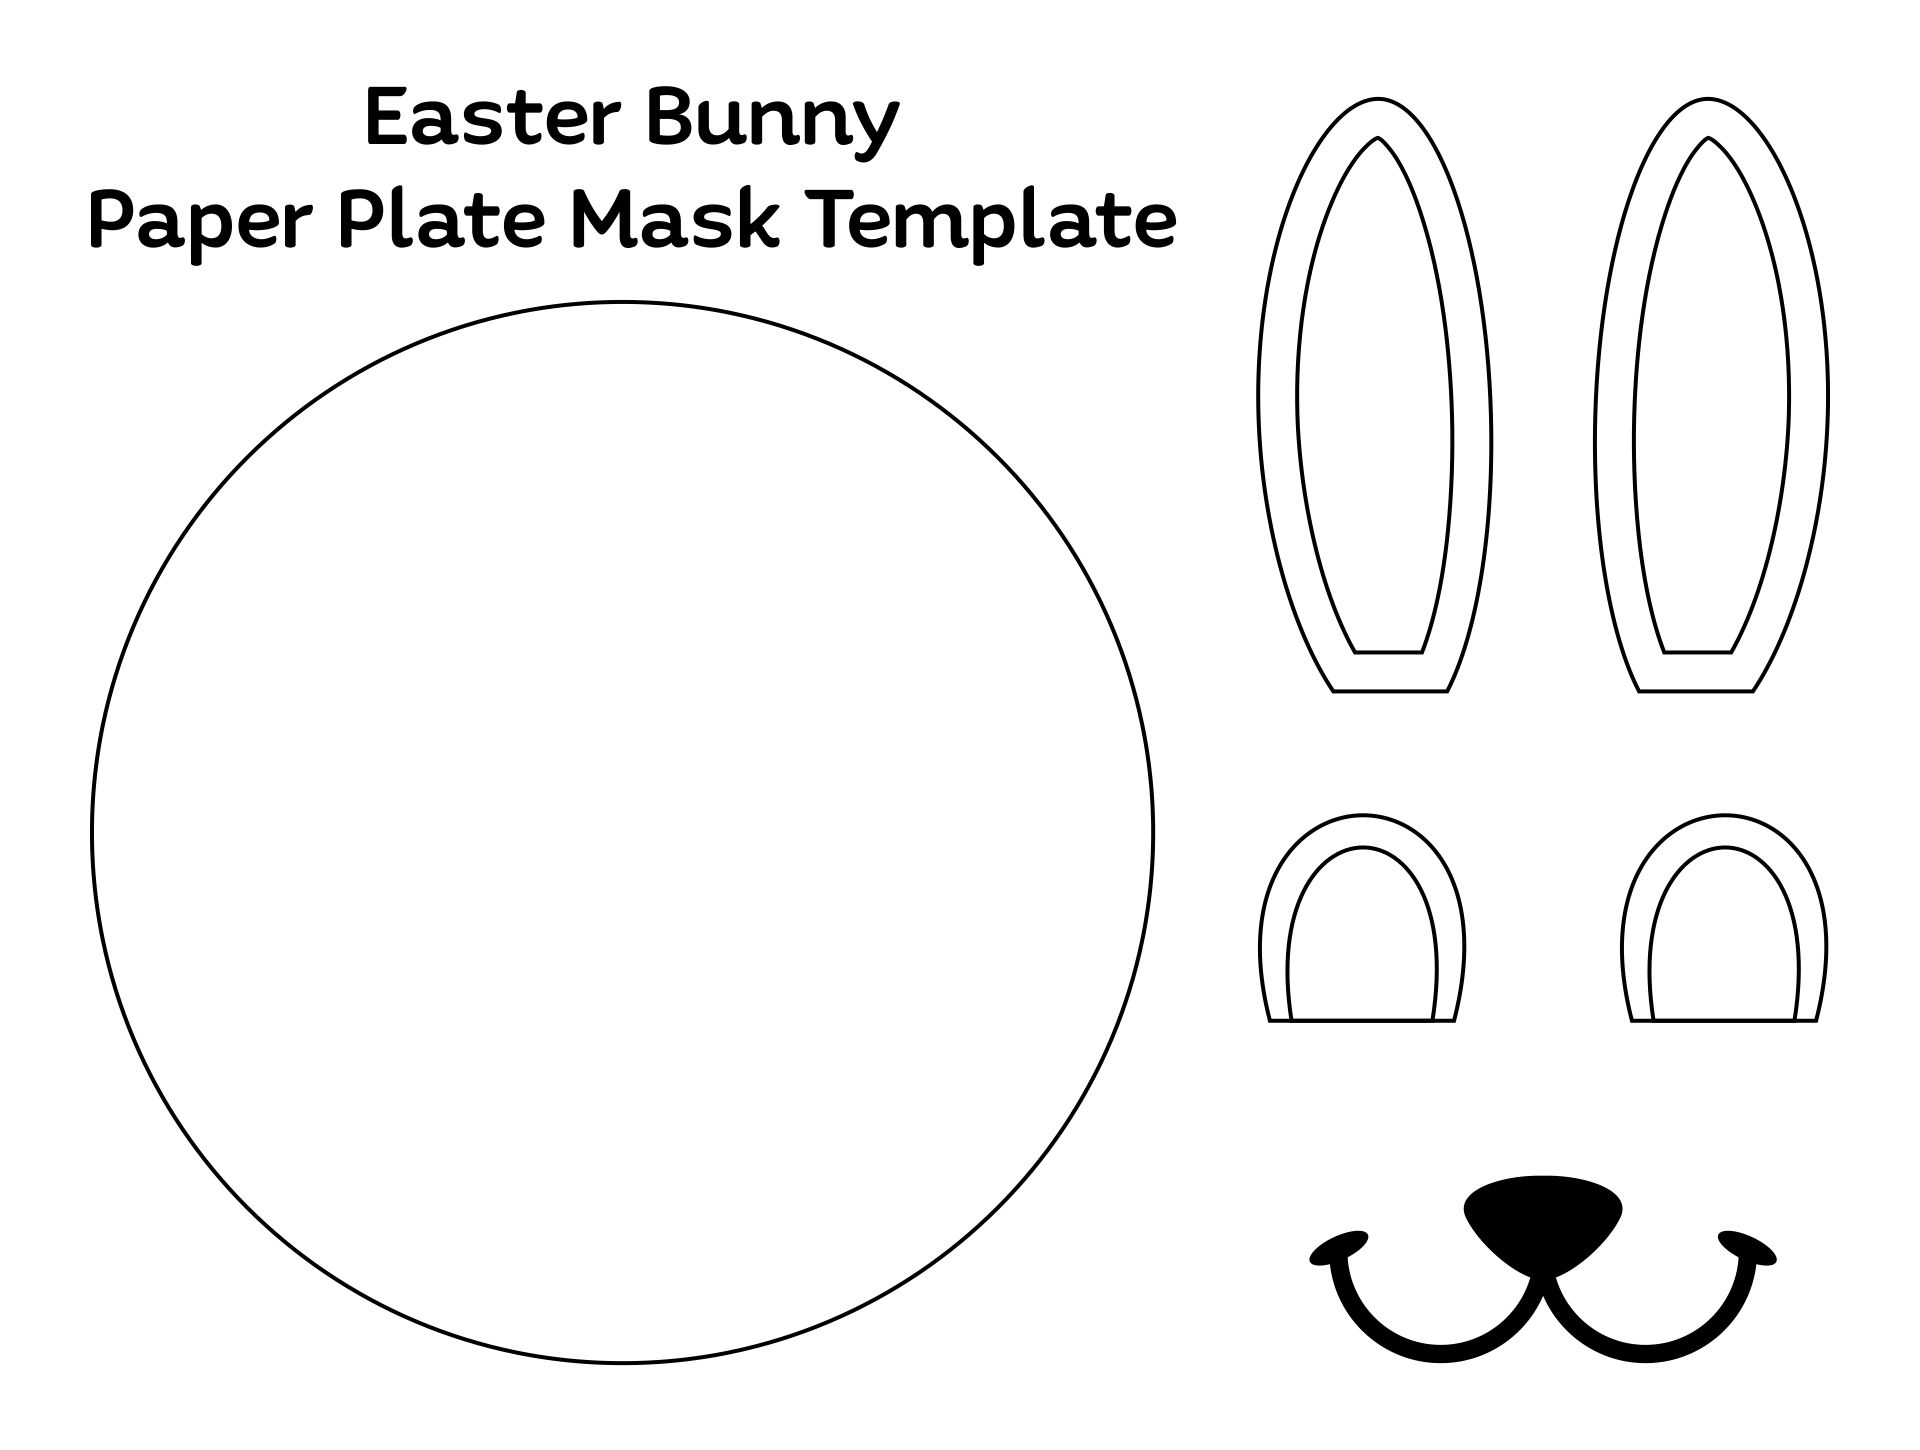 Easter Bunny Paper Plate Mask Template